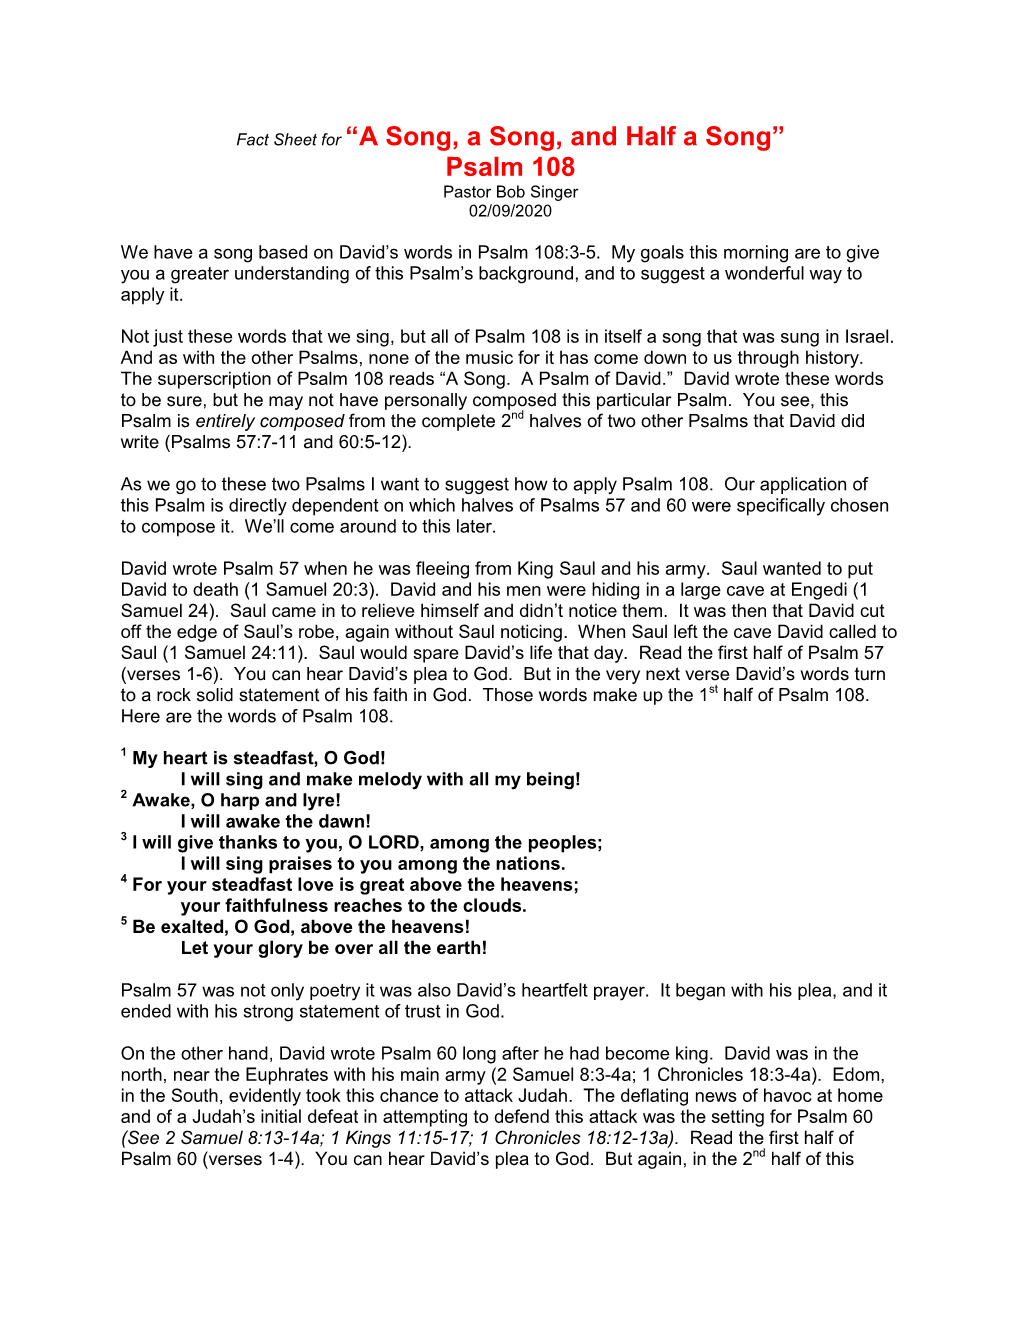 Fact Sheet for “A Song, a Song, and Half a Song” Psalm 108 Pastor Bob Singer 02/09/2020